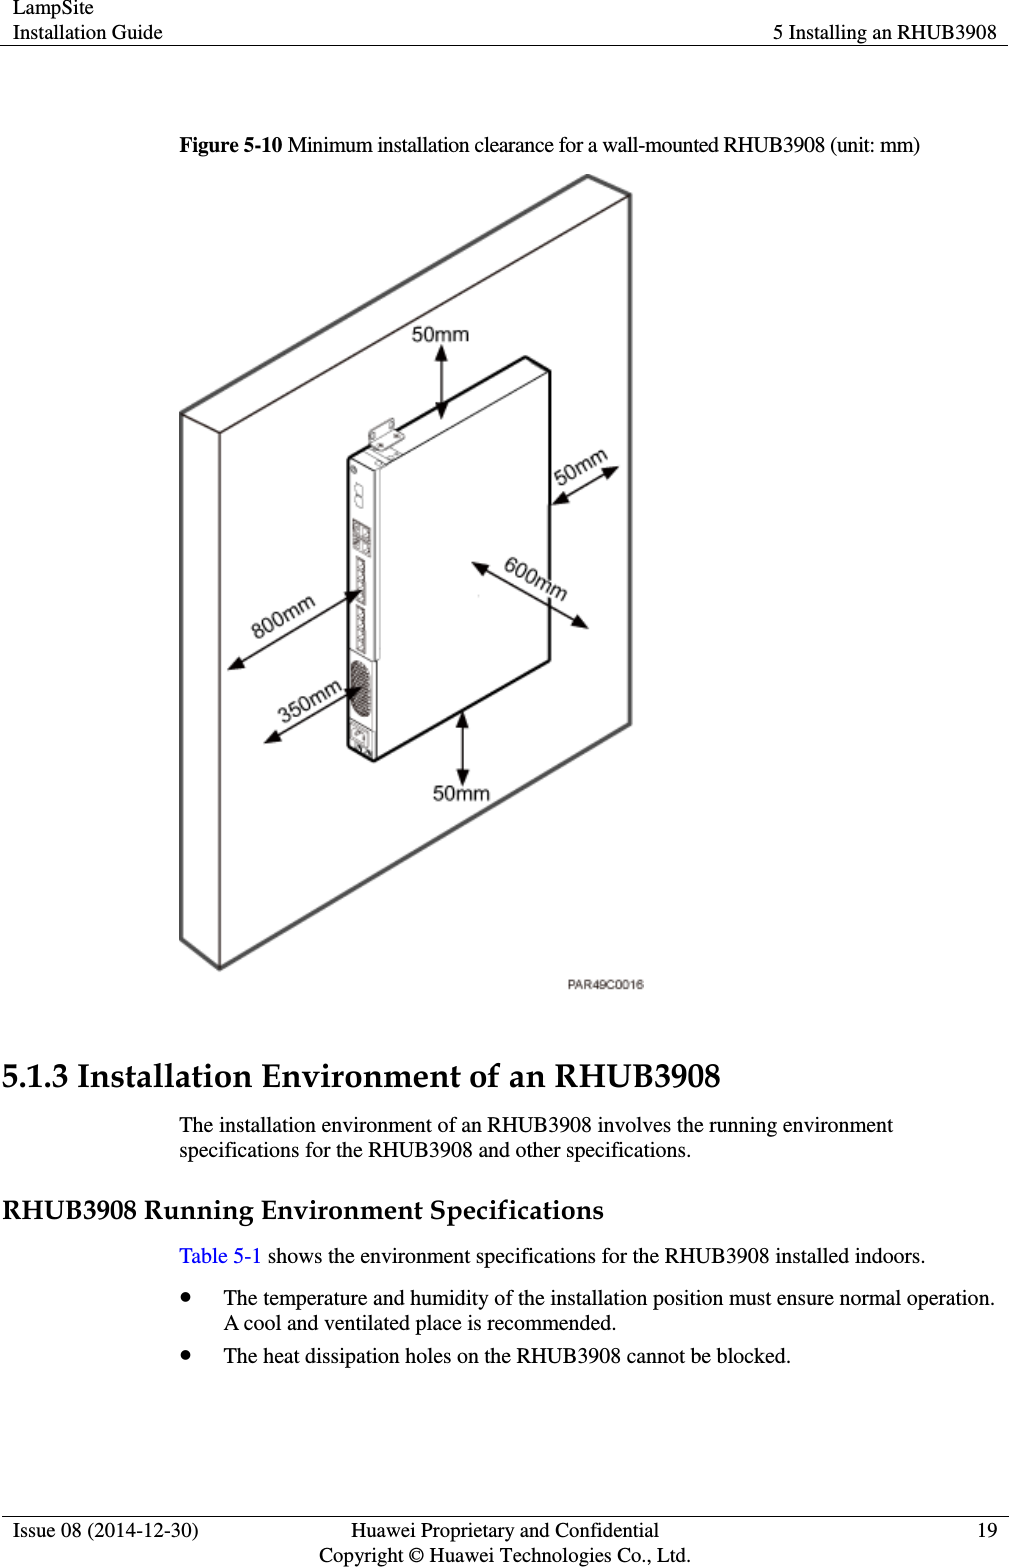 LampSite Installation Guide 5 Installing an RHUB3908  Issue 08 (2014-12-30) Huawei Proprietary and Confidential                                     Copyright © Huawei Technologies Co., Ltd. 19   Figure 5-10 Minimum installation clearance for a wall-mounted RHUB3908 (unit: mm)   5.1.3 Installation Environment of an RHUB3908 The installation environment of an RHUB3908 involves the running environment specifications for the RHUB3908 and other specifications.   RHUB3908 Running Environment Specifications Table 5-1 shows the environment specifications for the RHUB3908 installed indoors.    The temperature and humidity of the installation position must ensure normal operation. A cool and ventilated place is recommended.  The heat dissipation holes on the RHUB3908 cannot be blocked. 